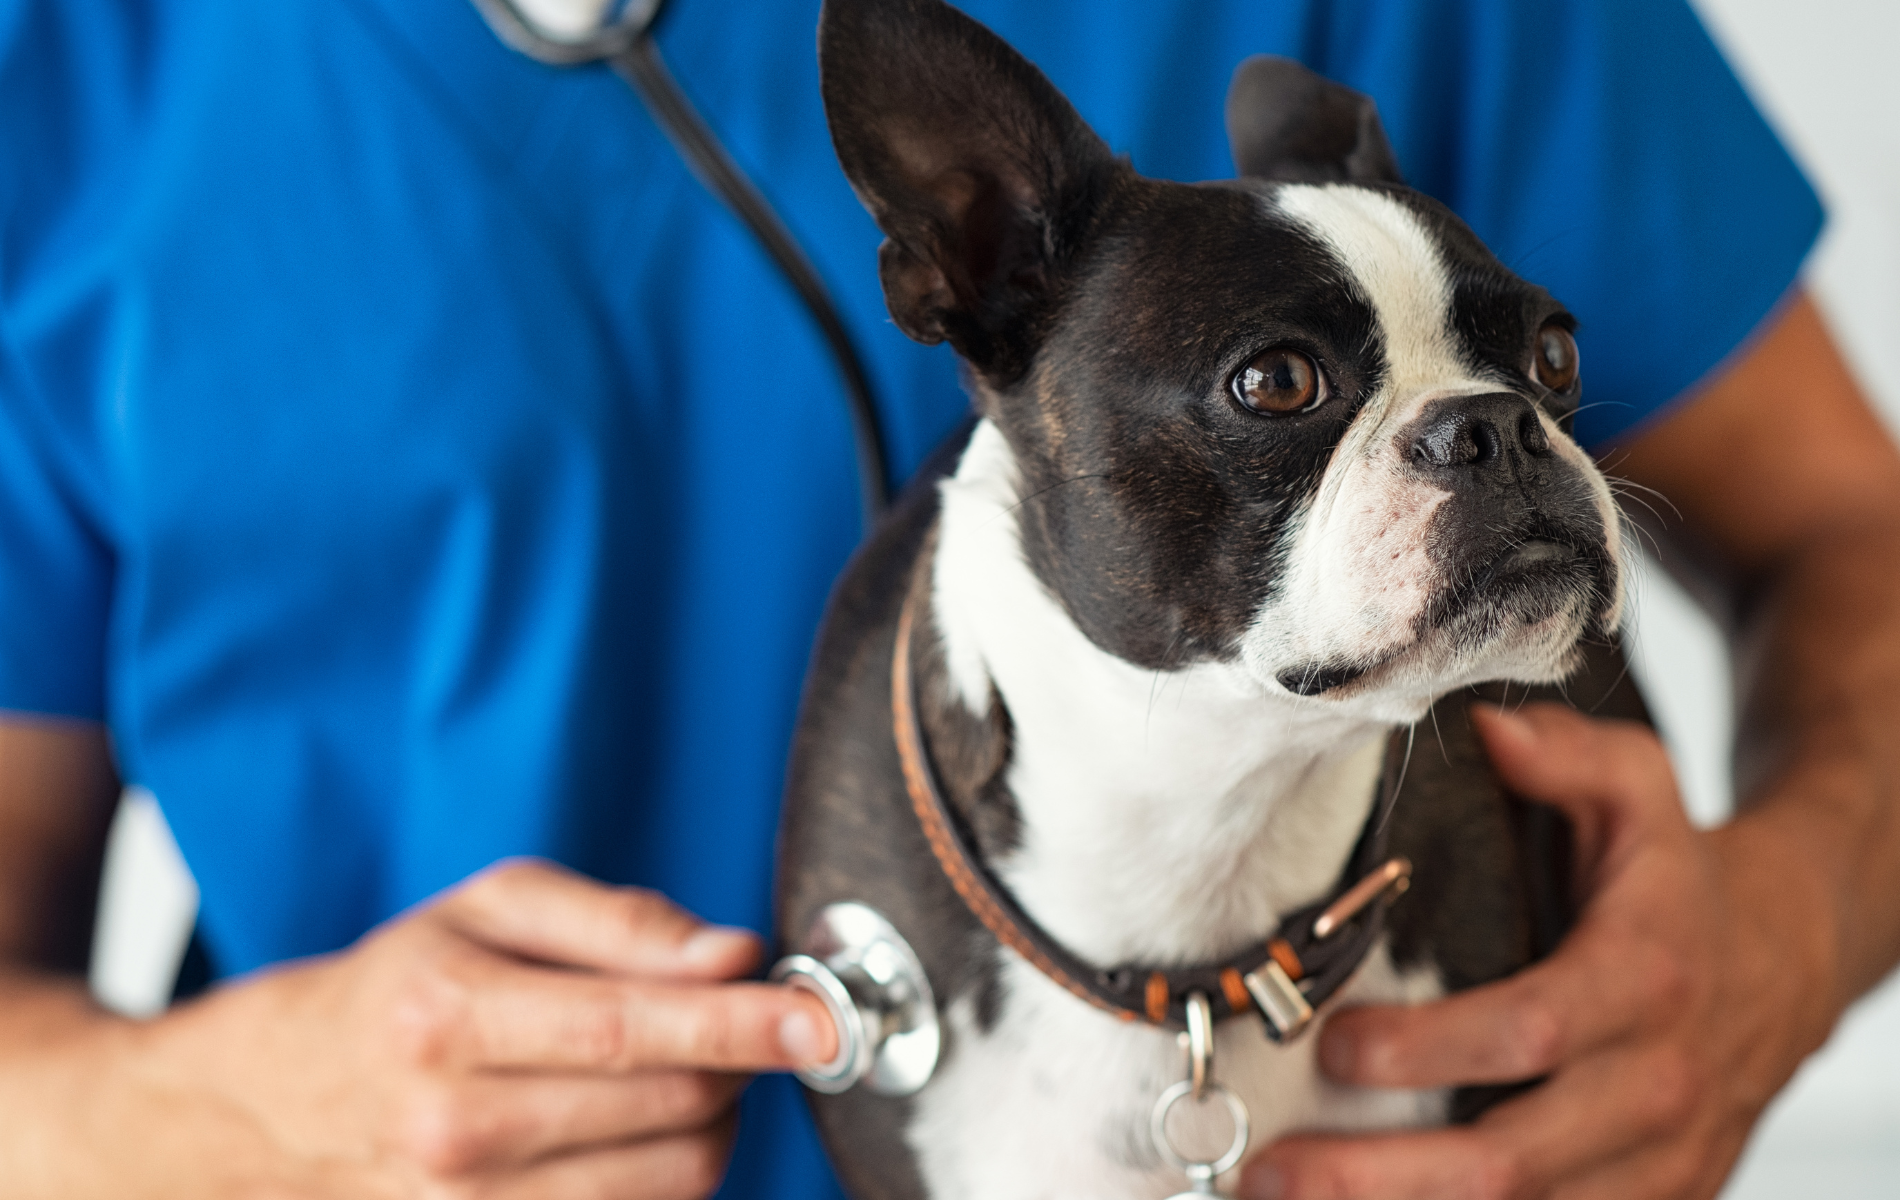 A dog with a stethoscope on its neck